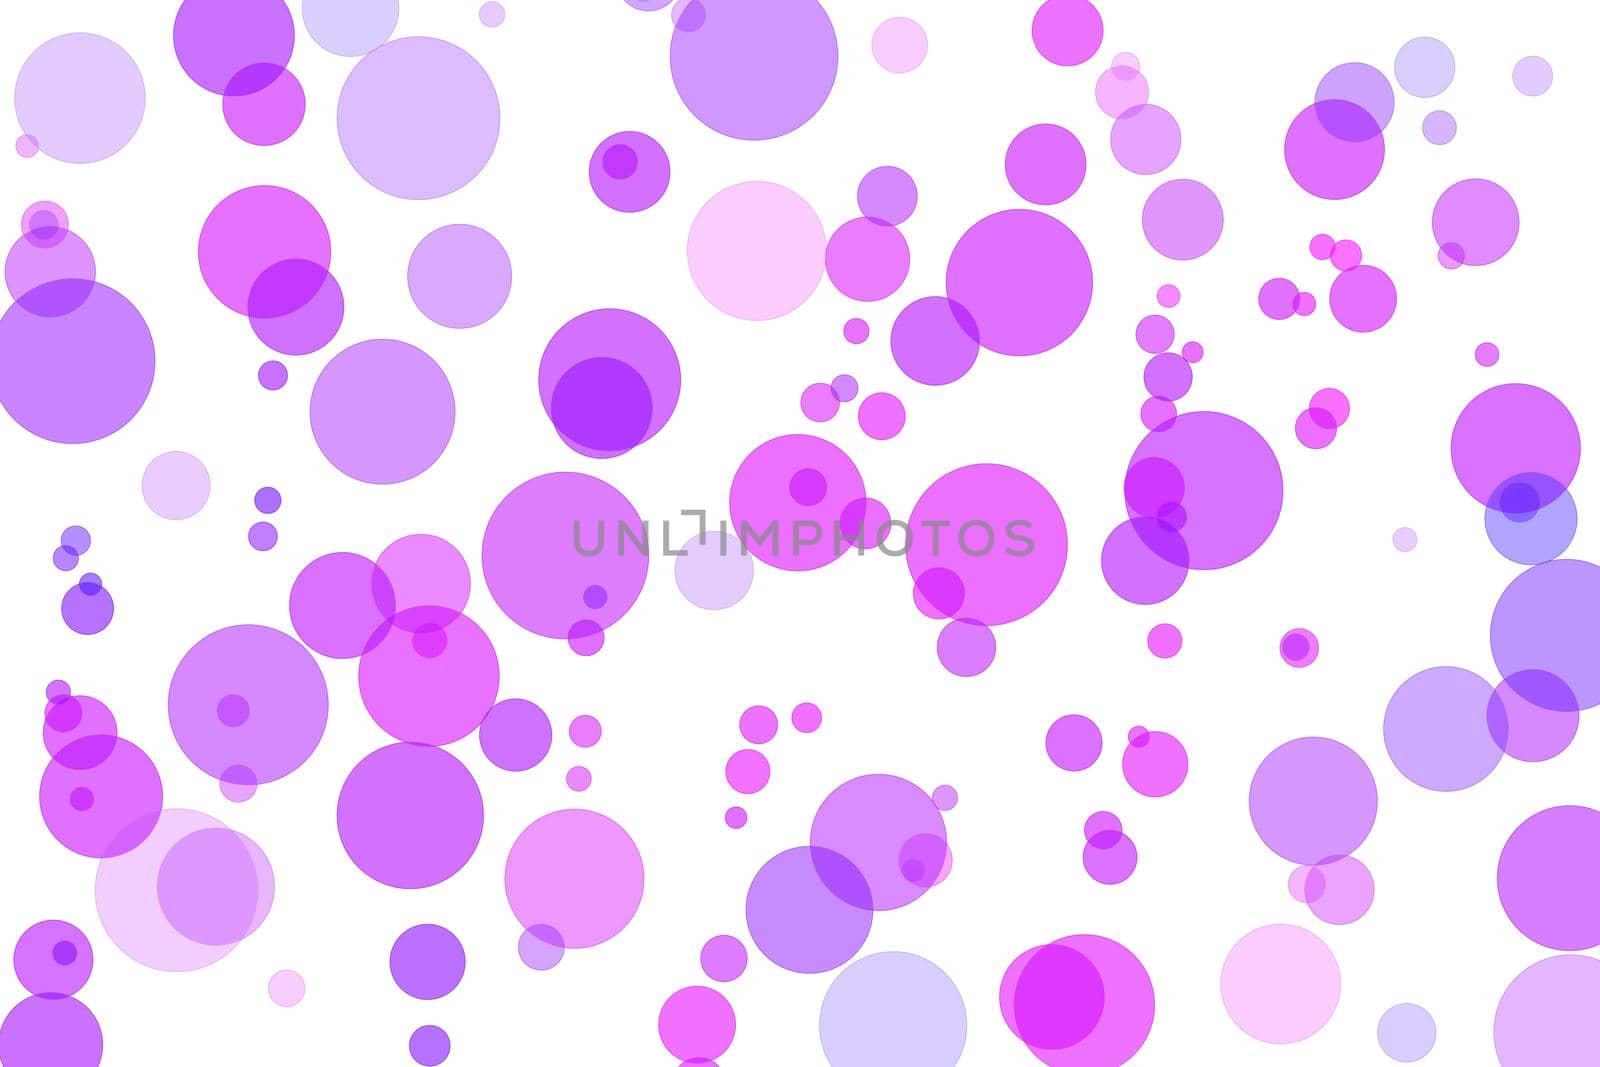 abstract background with circles of different sizes in burgundy